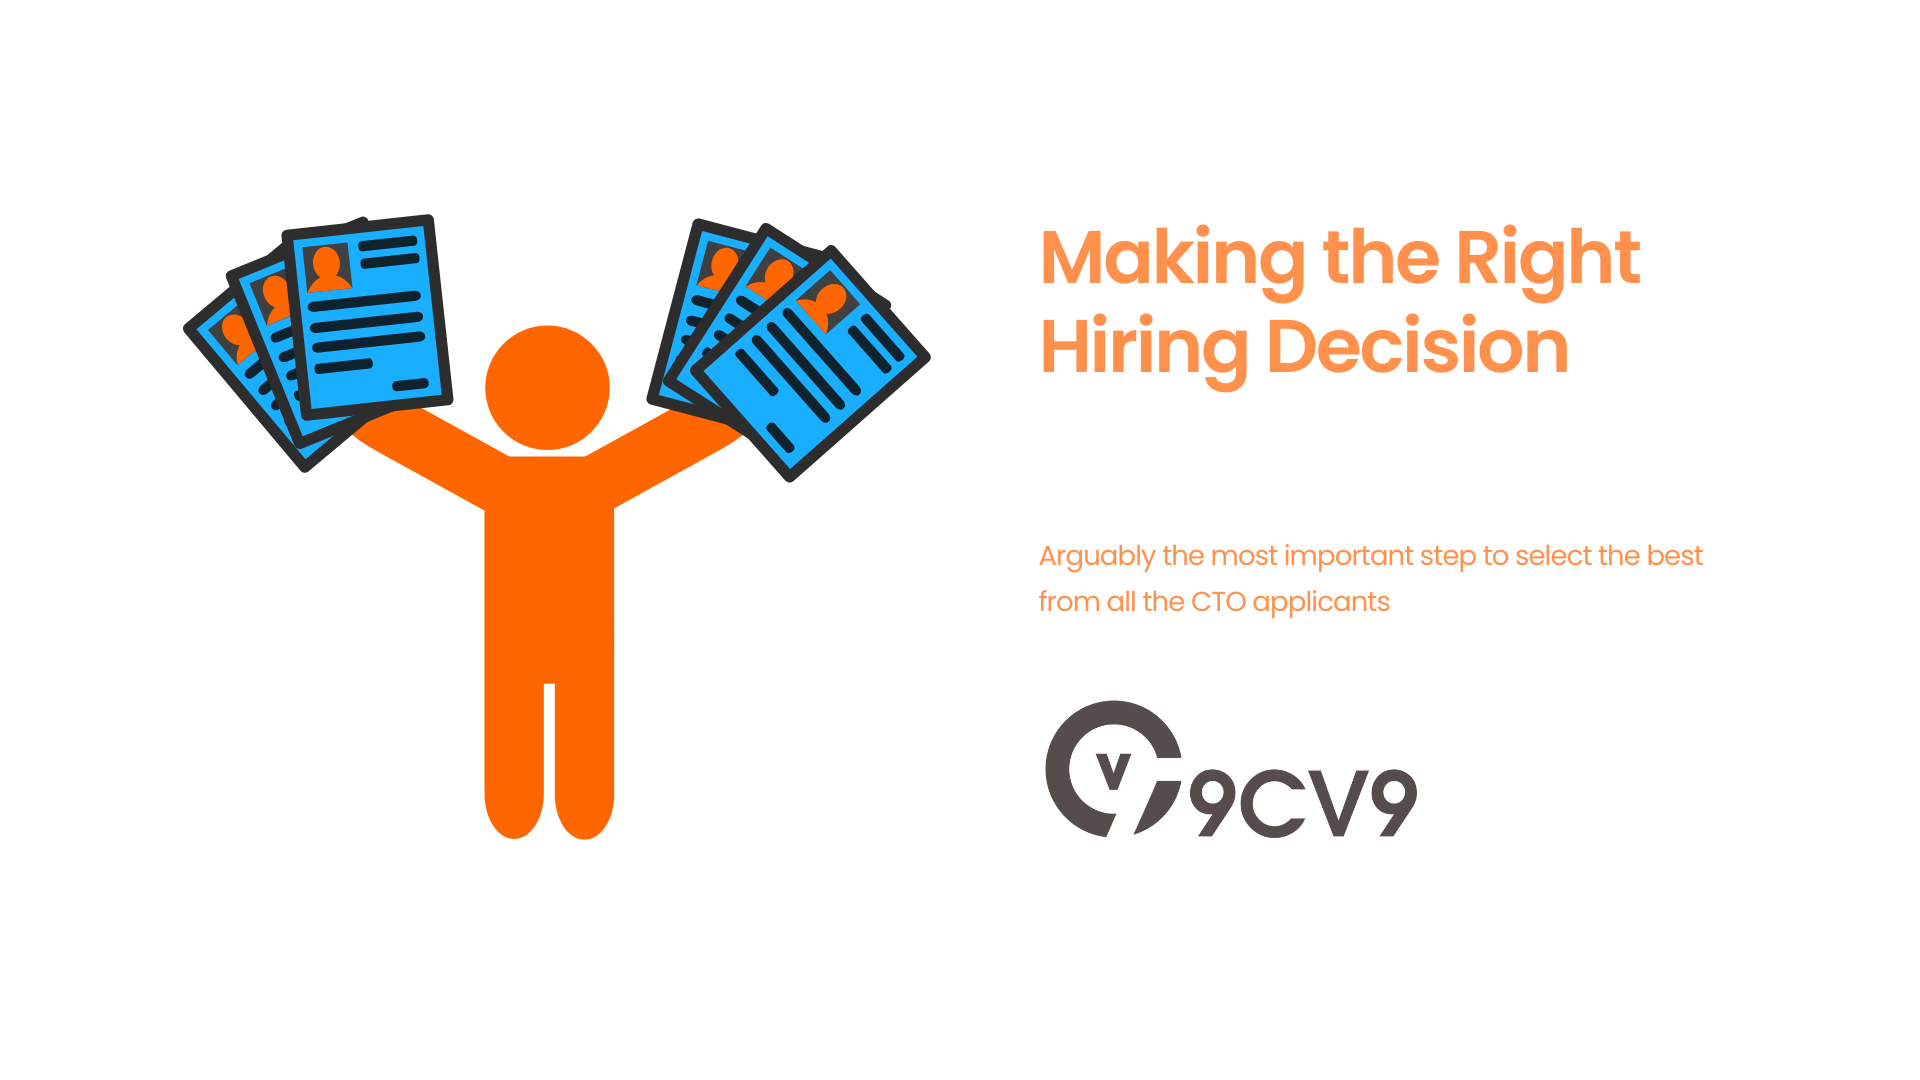 Making the Right Hiring Decision